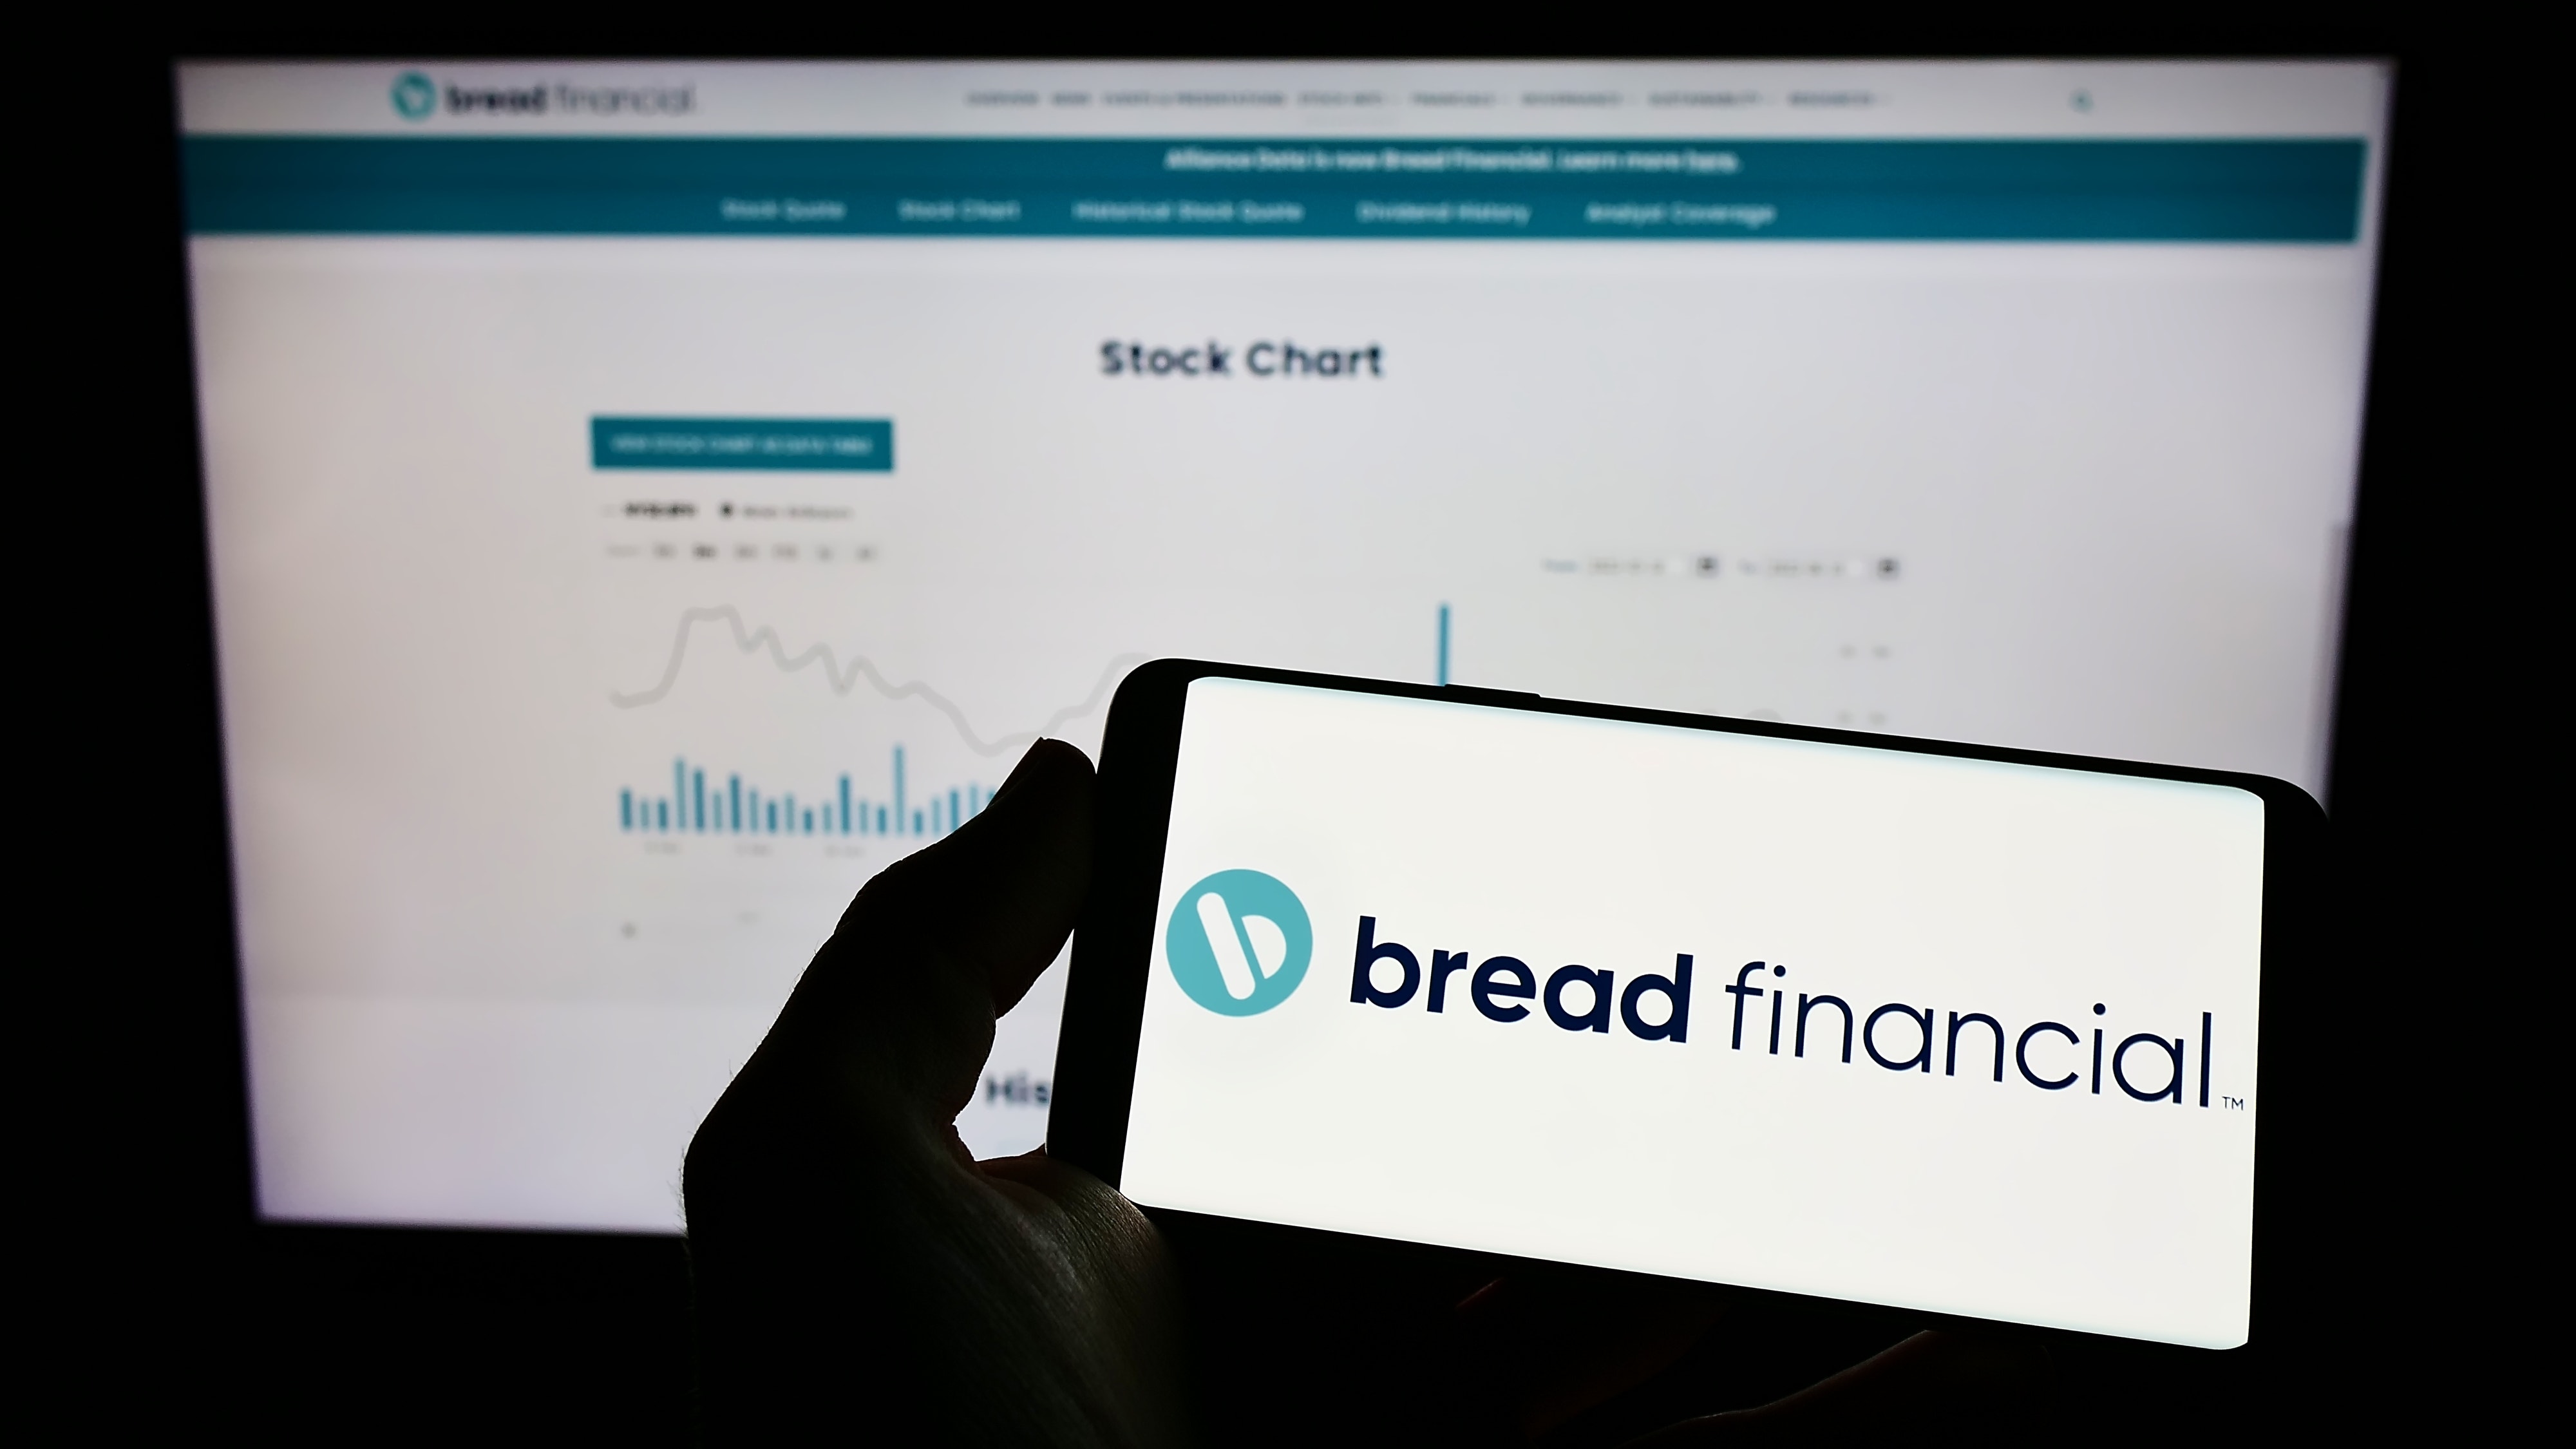 Do Options Traders Know Something About Bread Financial (BFH) Stock We Don't?